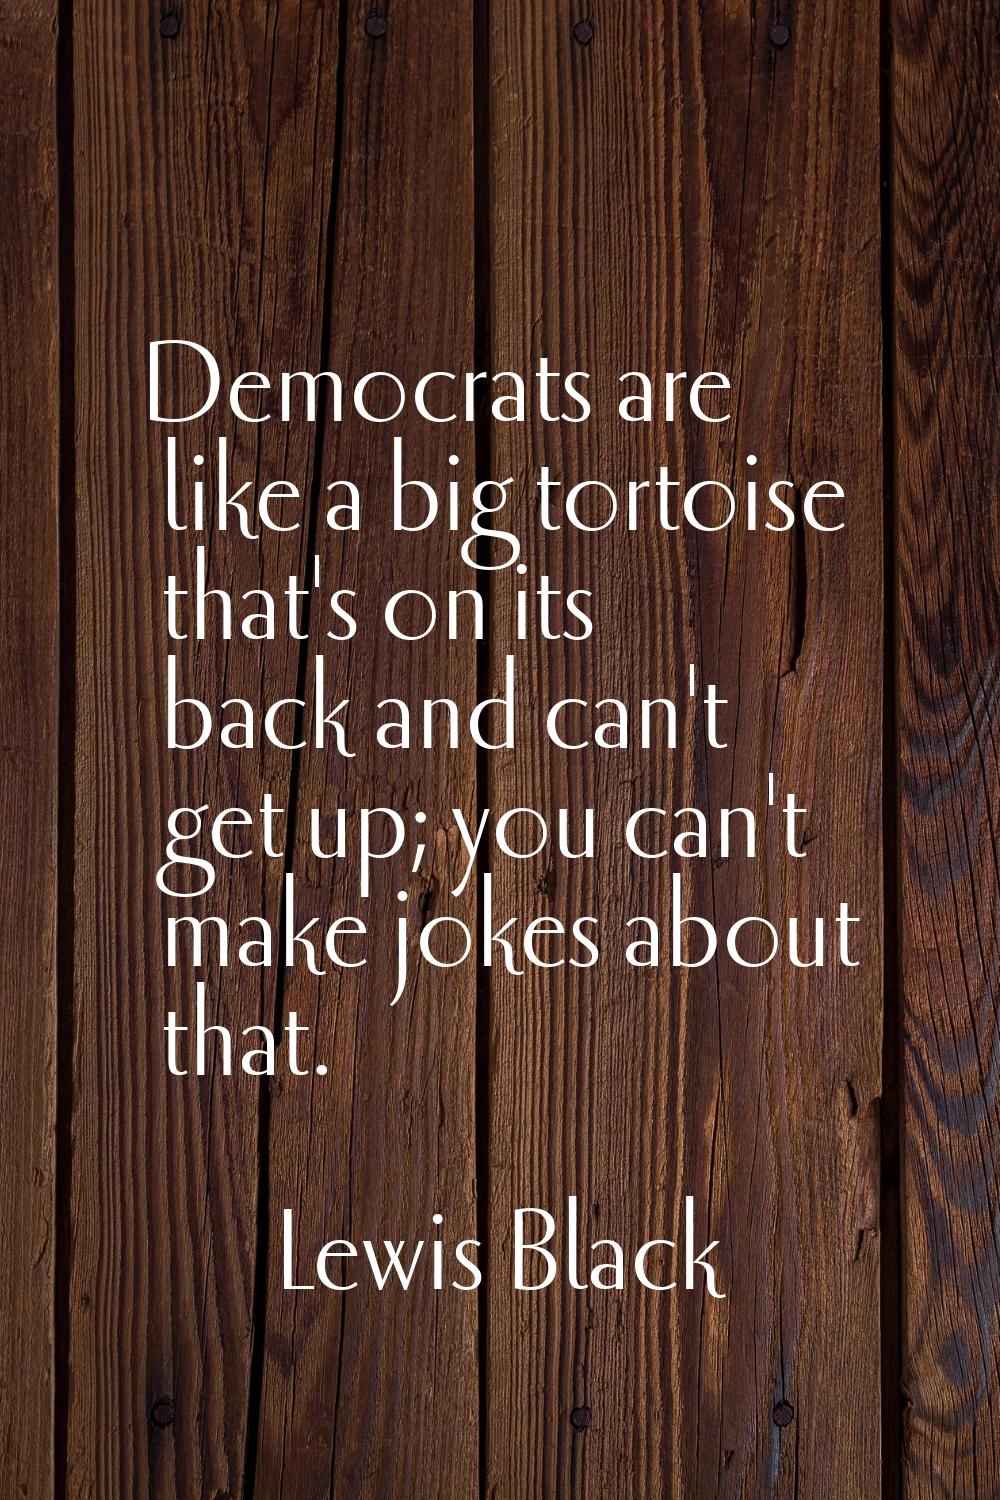 Democrats are like a big tortoise that's on its back and can't get up; you can't make jokes about t